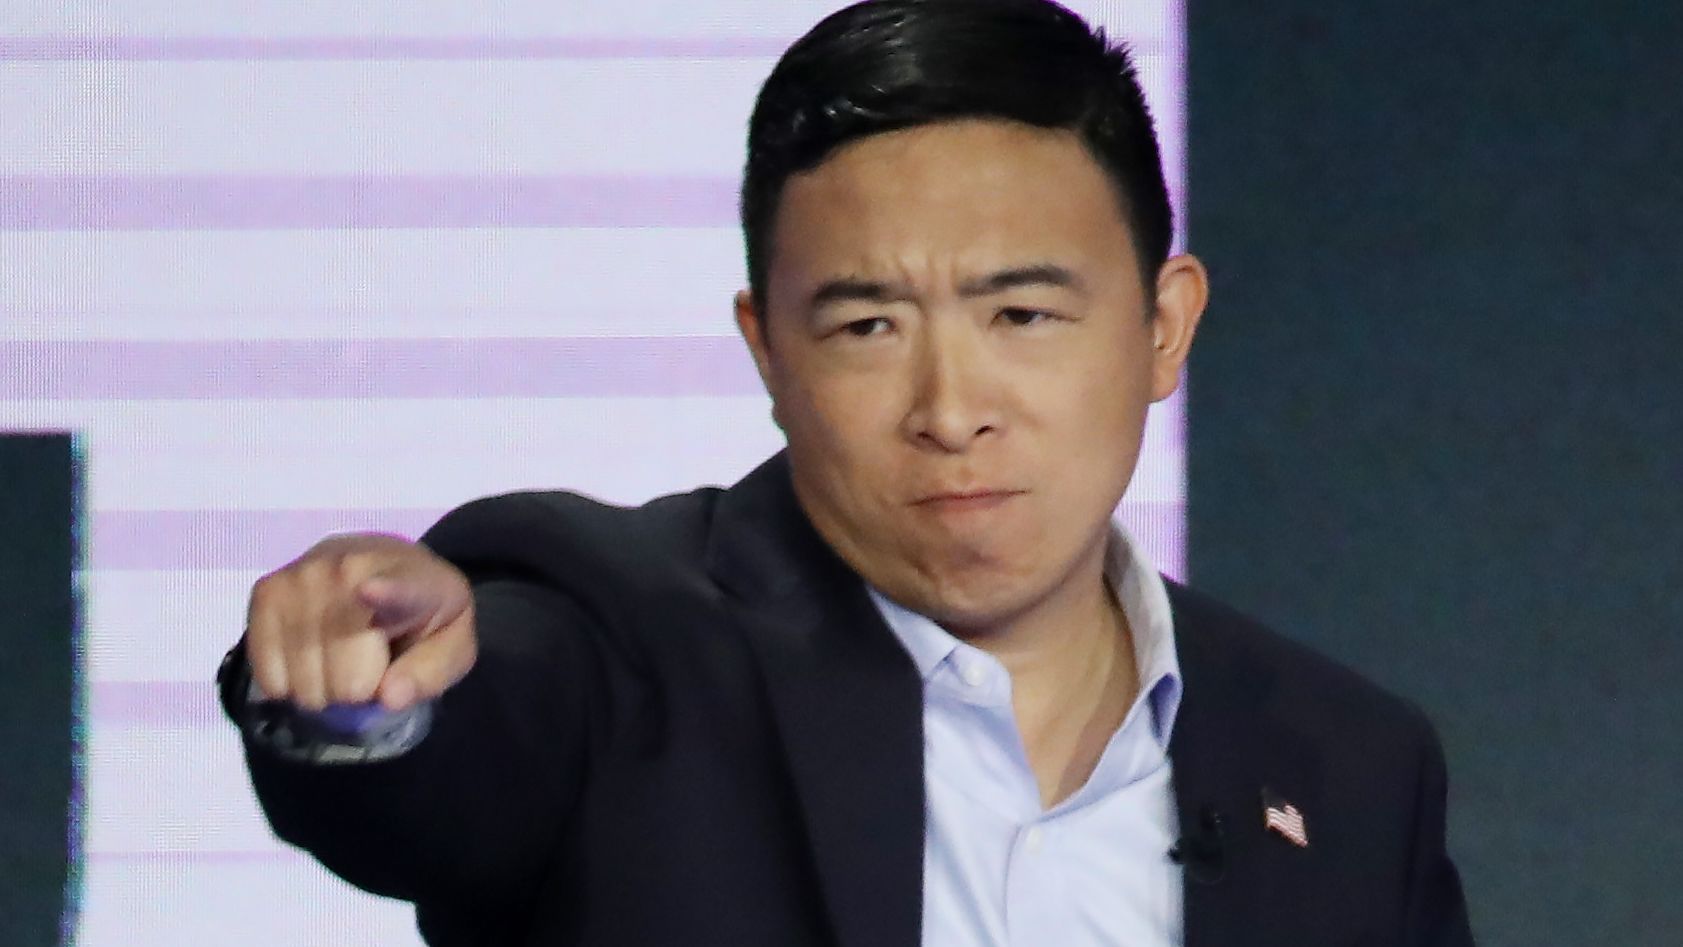 MIAMI, FLORIDA - JUNE 27:  Former tech executive Andrew Yang reacts during the second night of the first Democratic presidential debate on June 27, 2019 in Miami, Florida.  A field of 20 Democratic presidential candidates was split into two groups of 10 for the first debate of the 2020 election, taking place over two nights at Knight Concert Hall of the Adrienne Arsht Center for the Performing Arts of Miami-Dade County, hosted by NBC News, MSNBC, and Telemundo. (Photo by Drew Angerer/Getty Images)